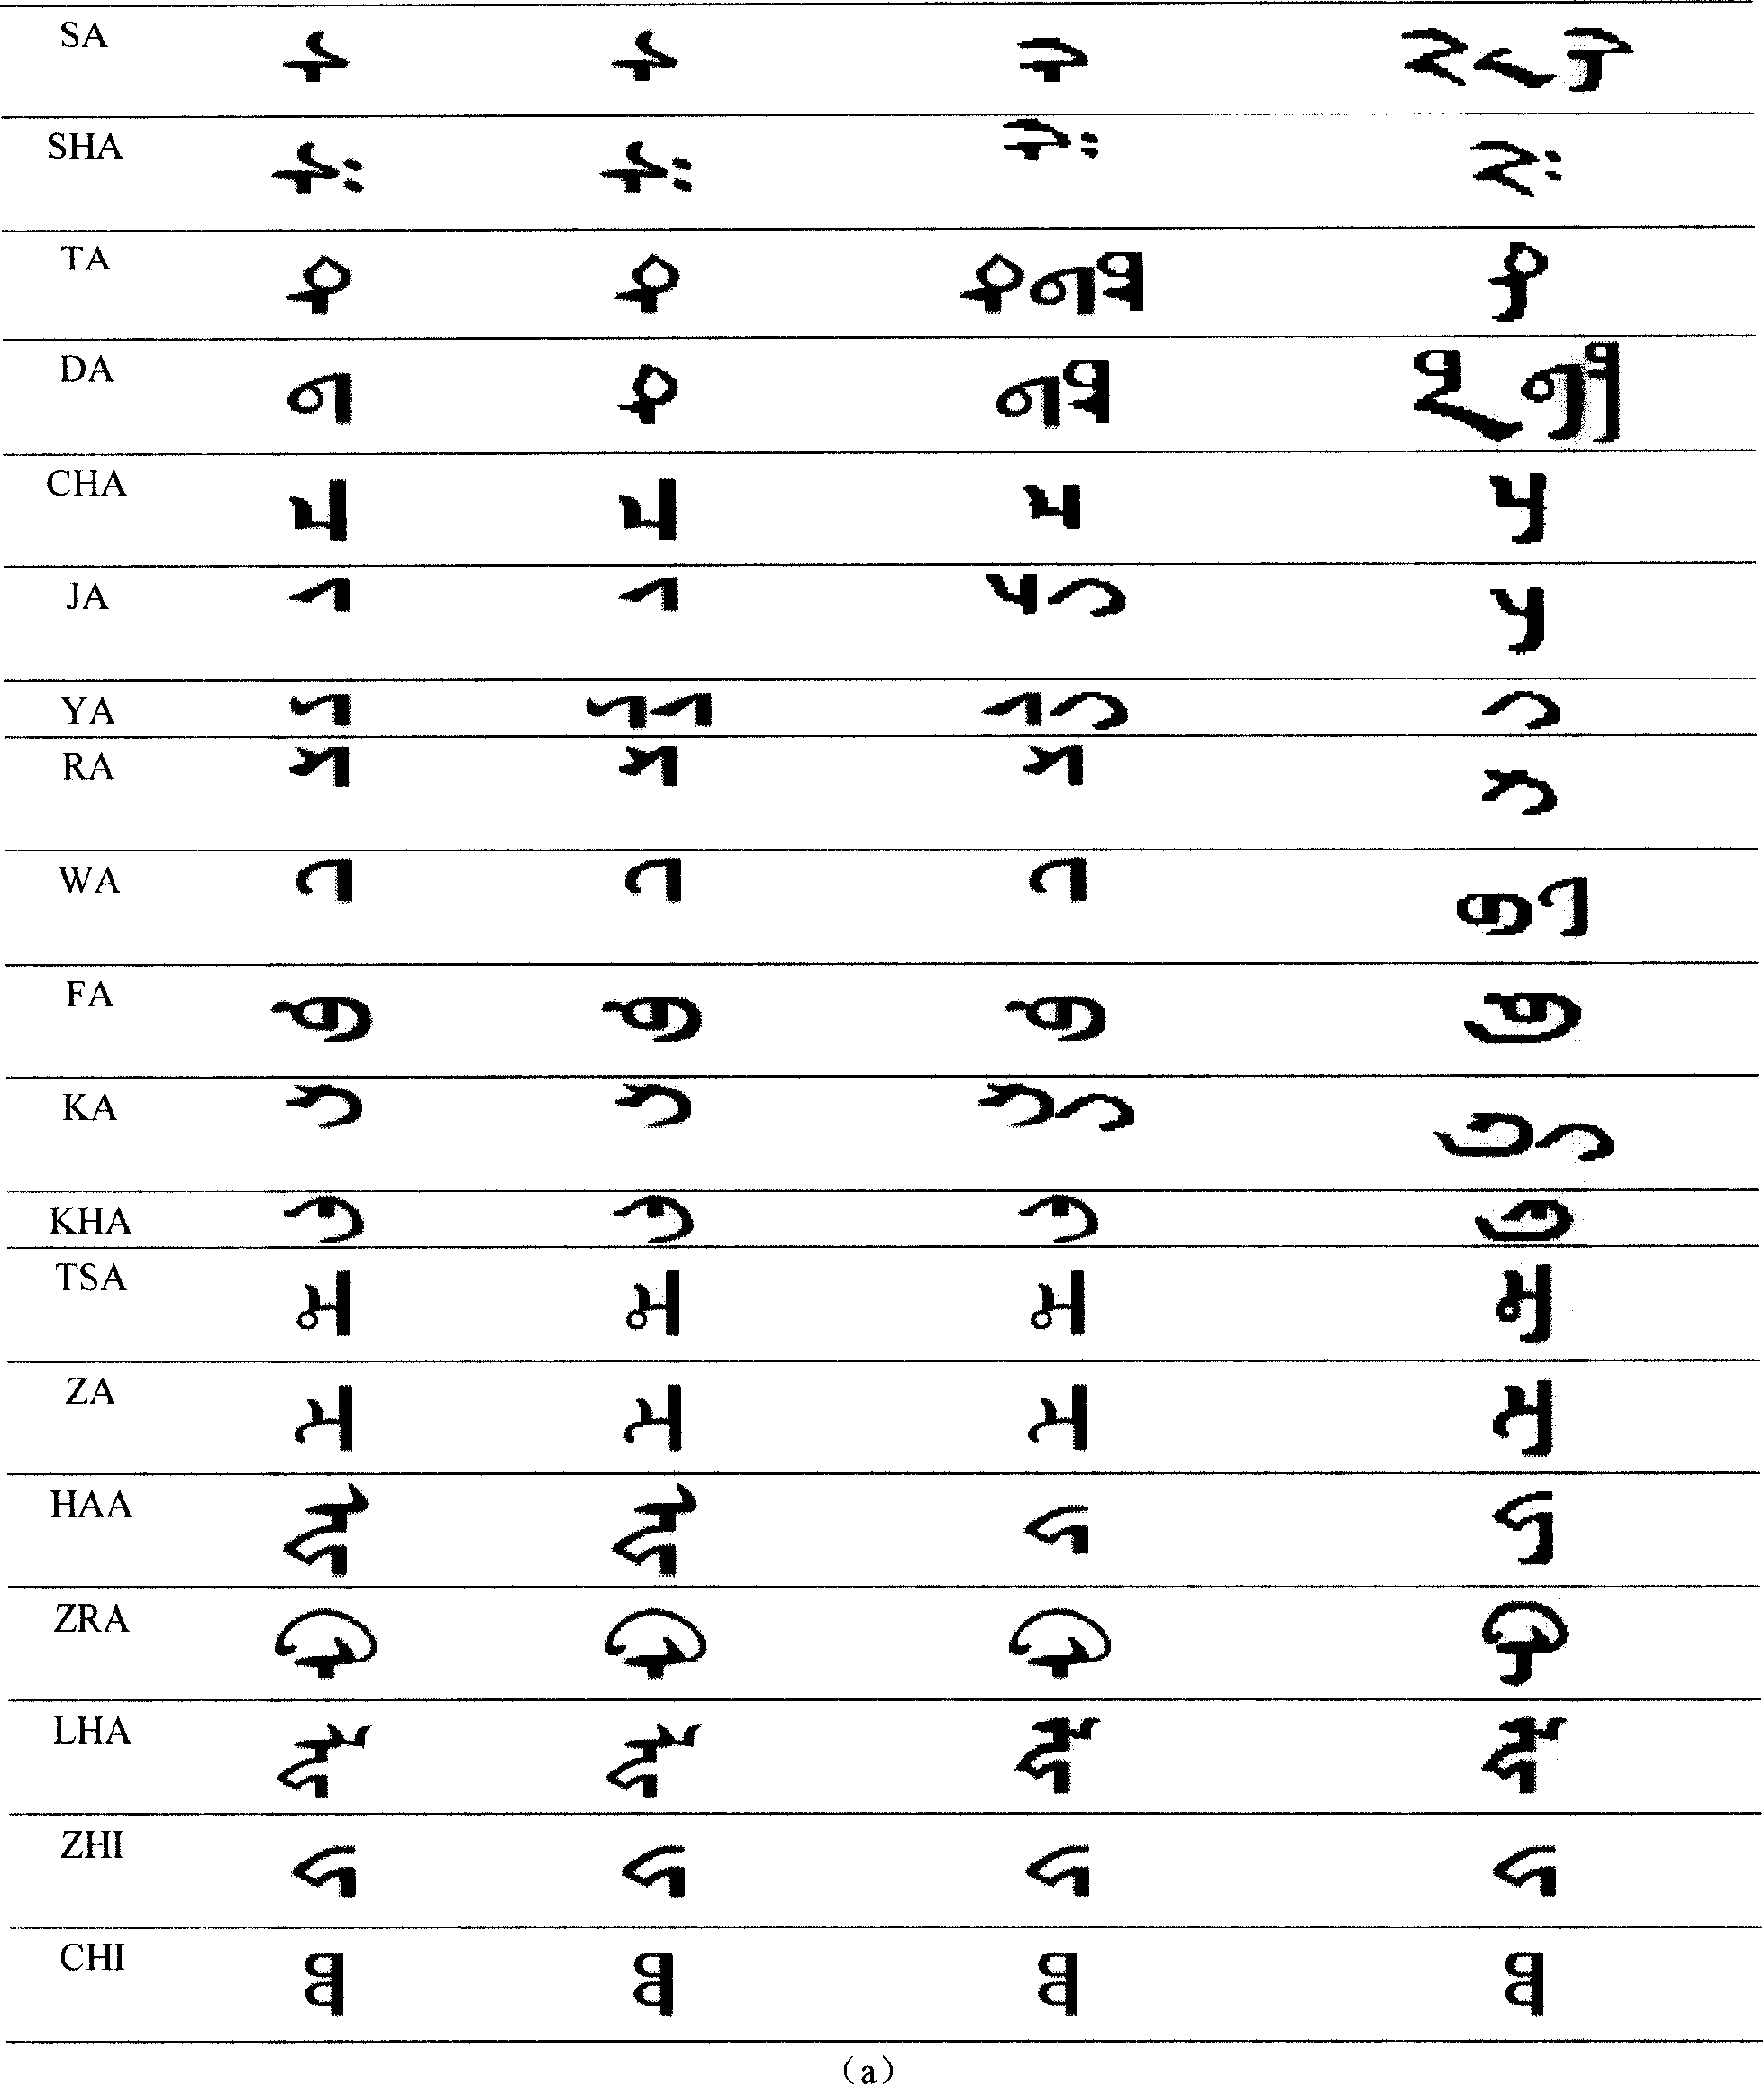 Recognition method of printed mongolian character